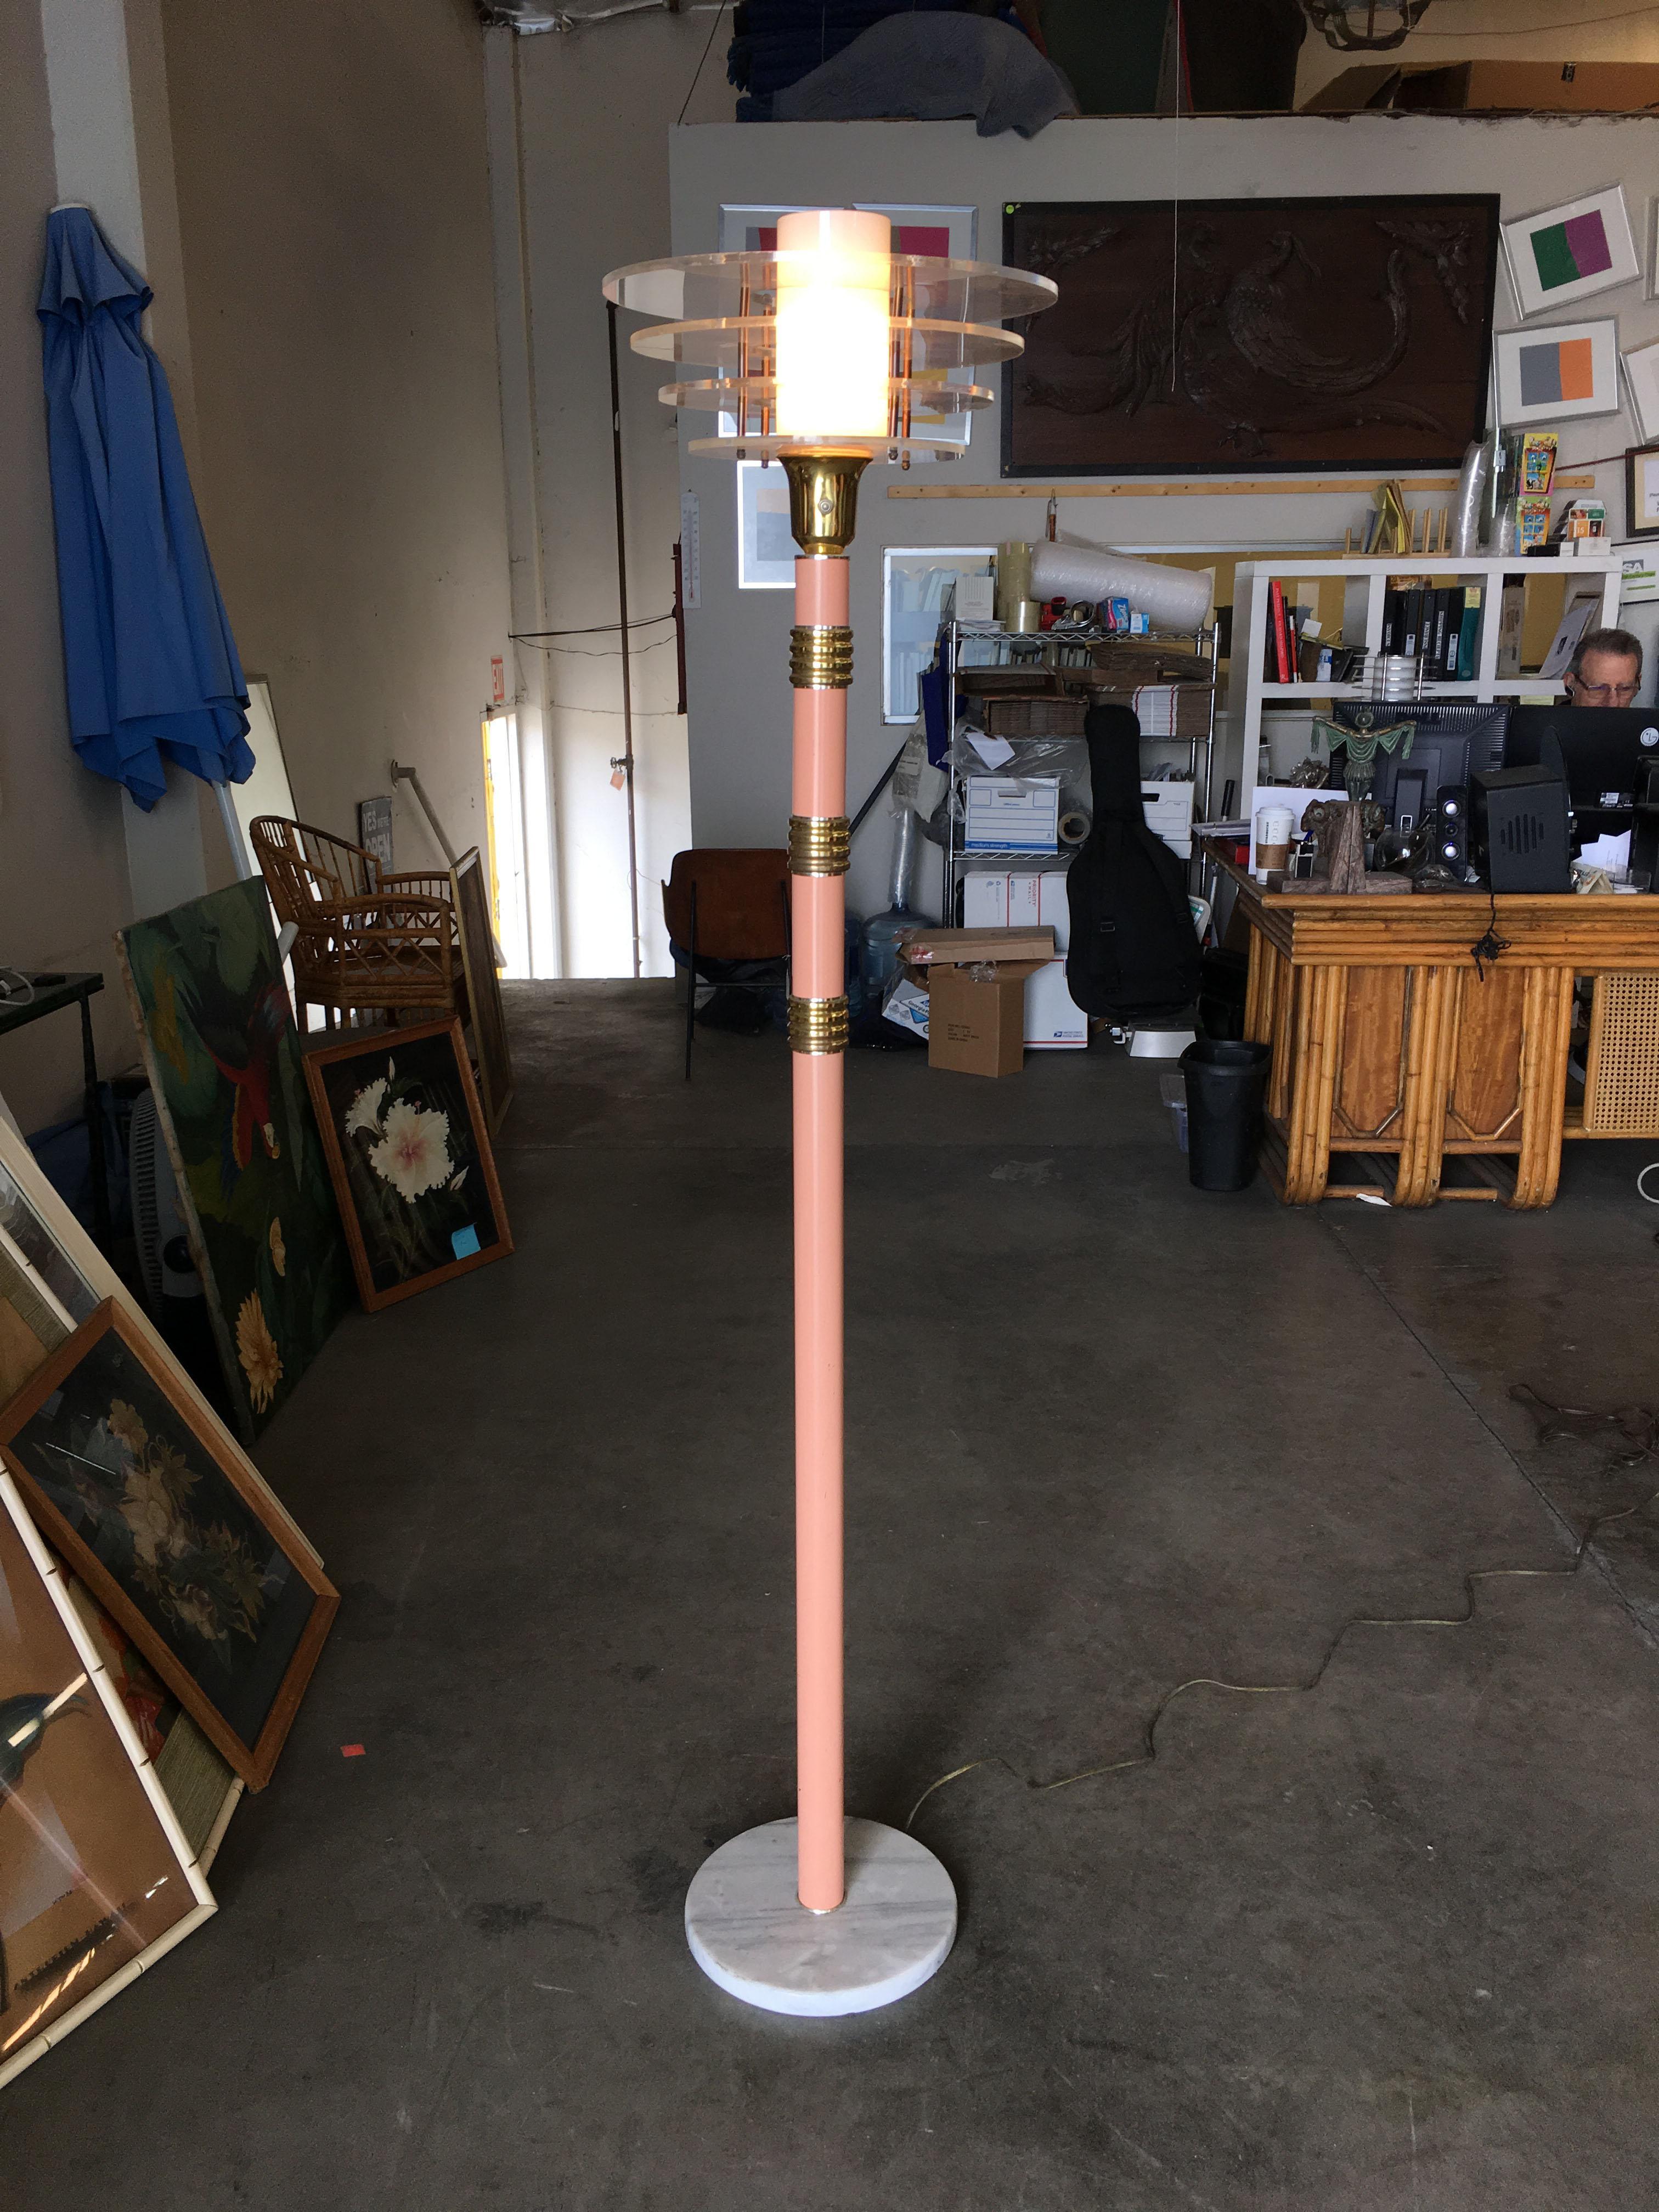 Memphis style floor lamp features brass and pink enameled base with an acrylic and glass machine-age inspired shade. Great for that Vapor Wave Miami Vice living room!

Circa 1980.
Dimensions: 66